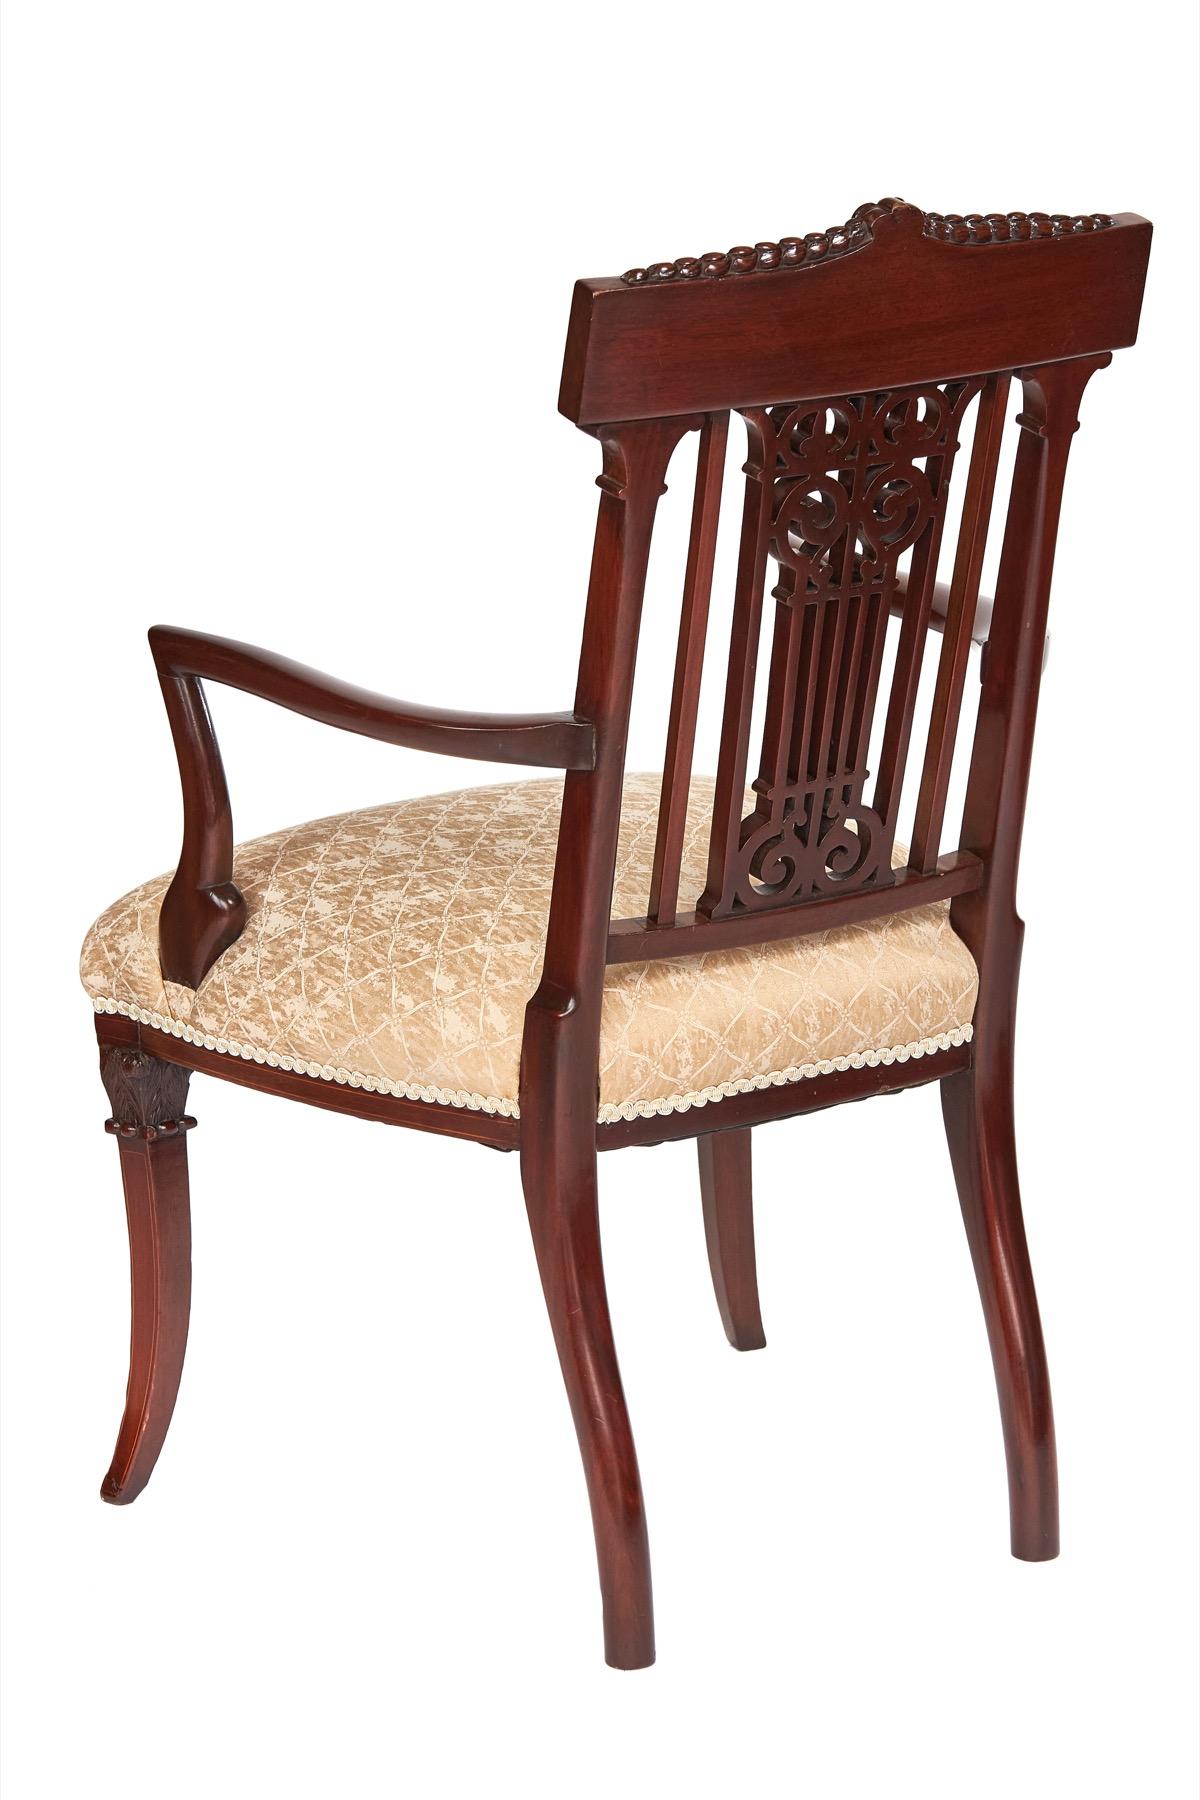 British Fine Sheraton Revival Mahogany inlaid & carved Elbow chair For Sale